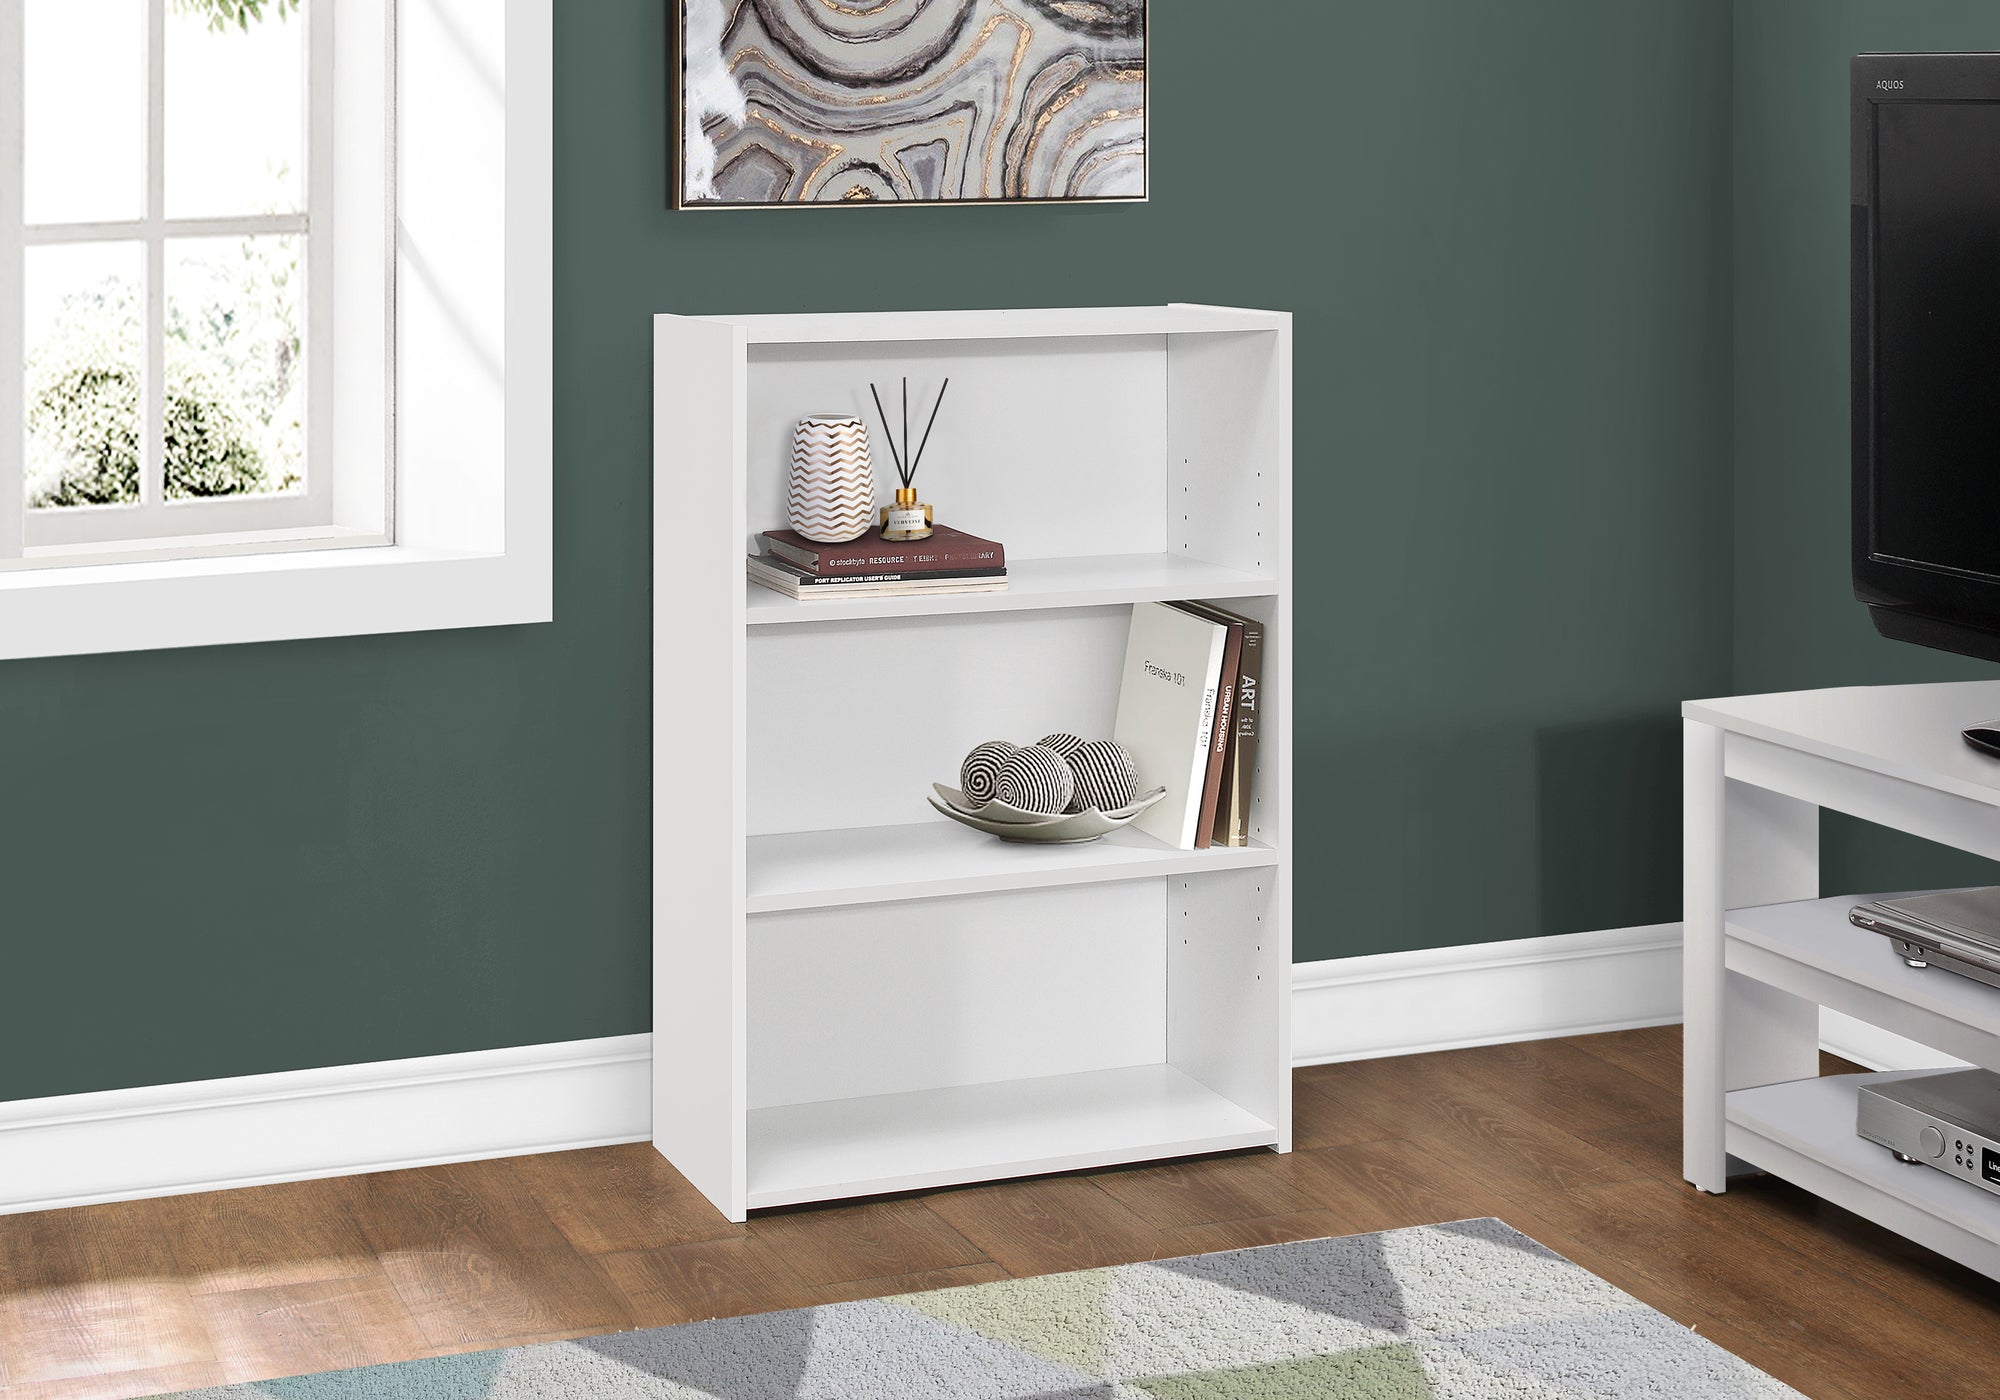 MN-367479    Bookshelf, Bookcase, 4 Tier, 36"H, Office, Bedroom, Laminate, White, Contemporary, Modern, Transitional